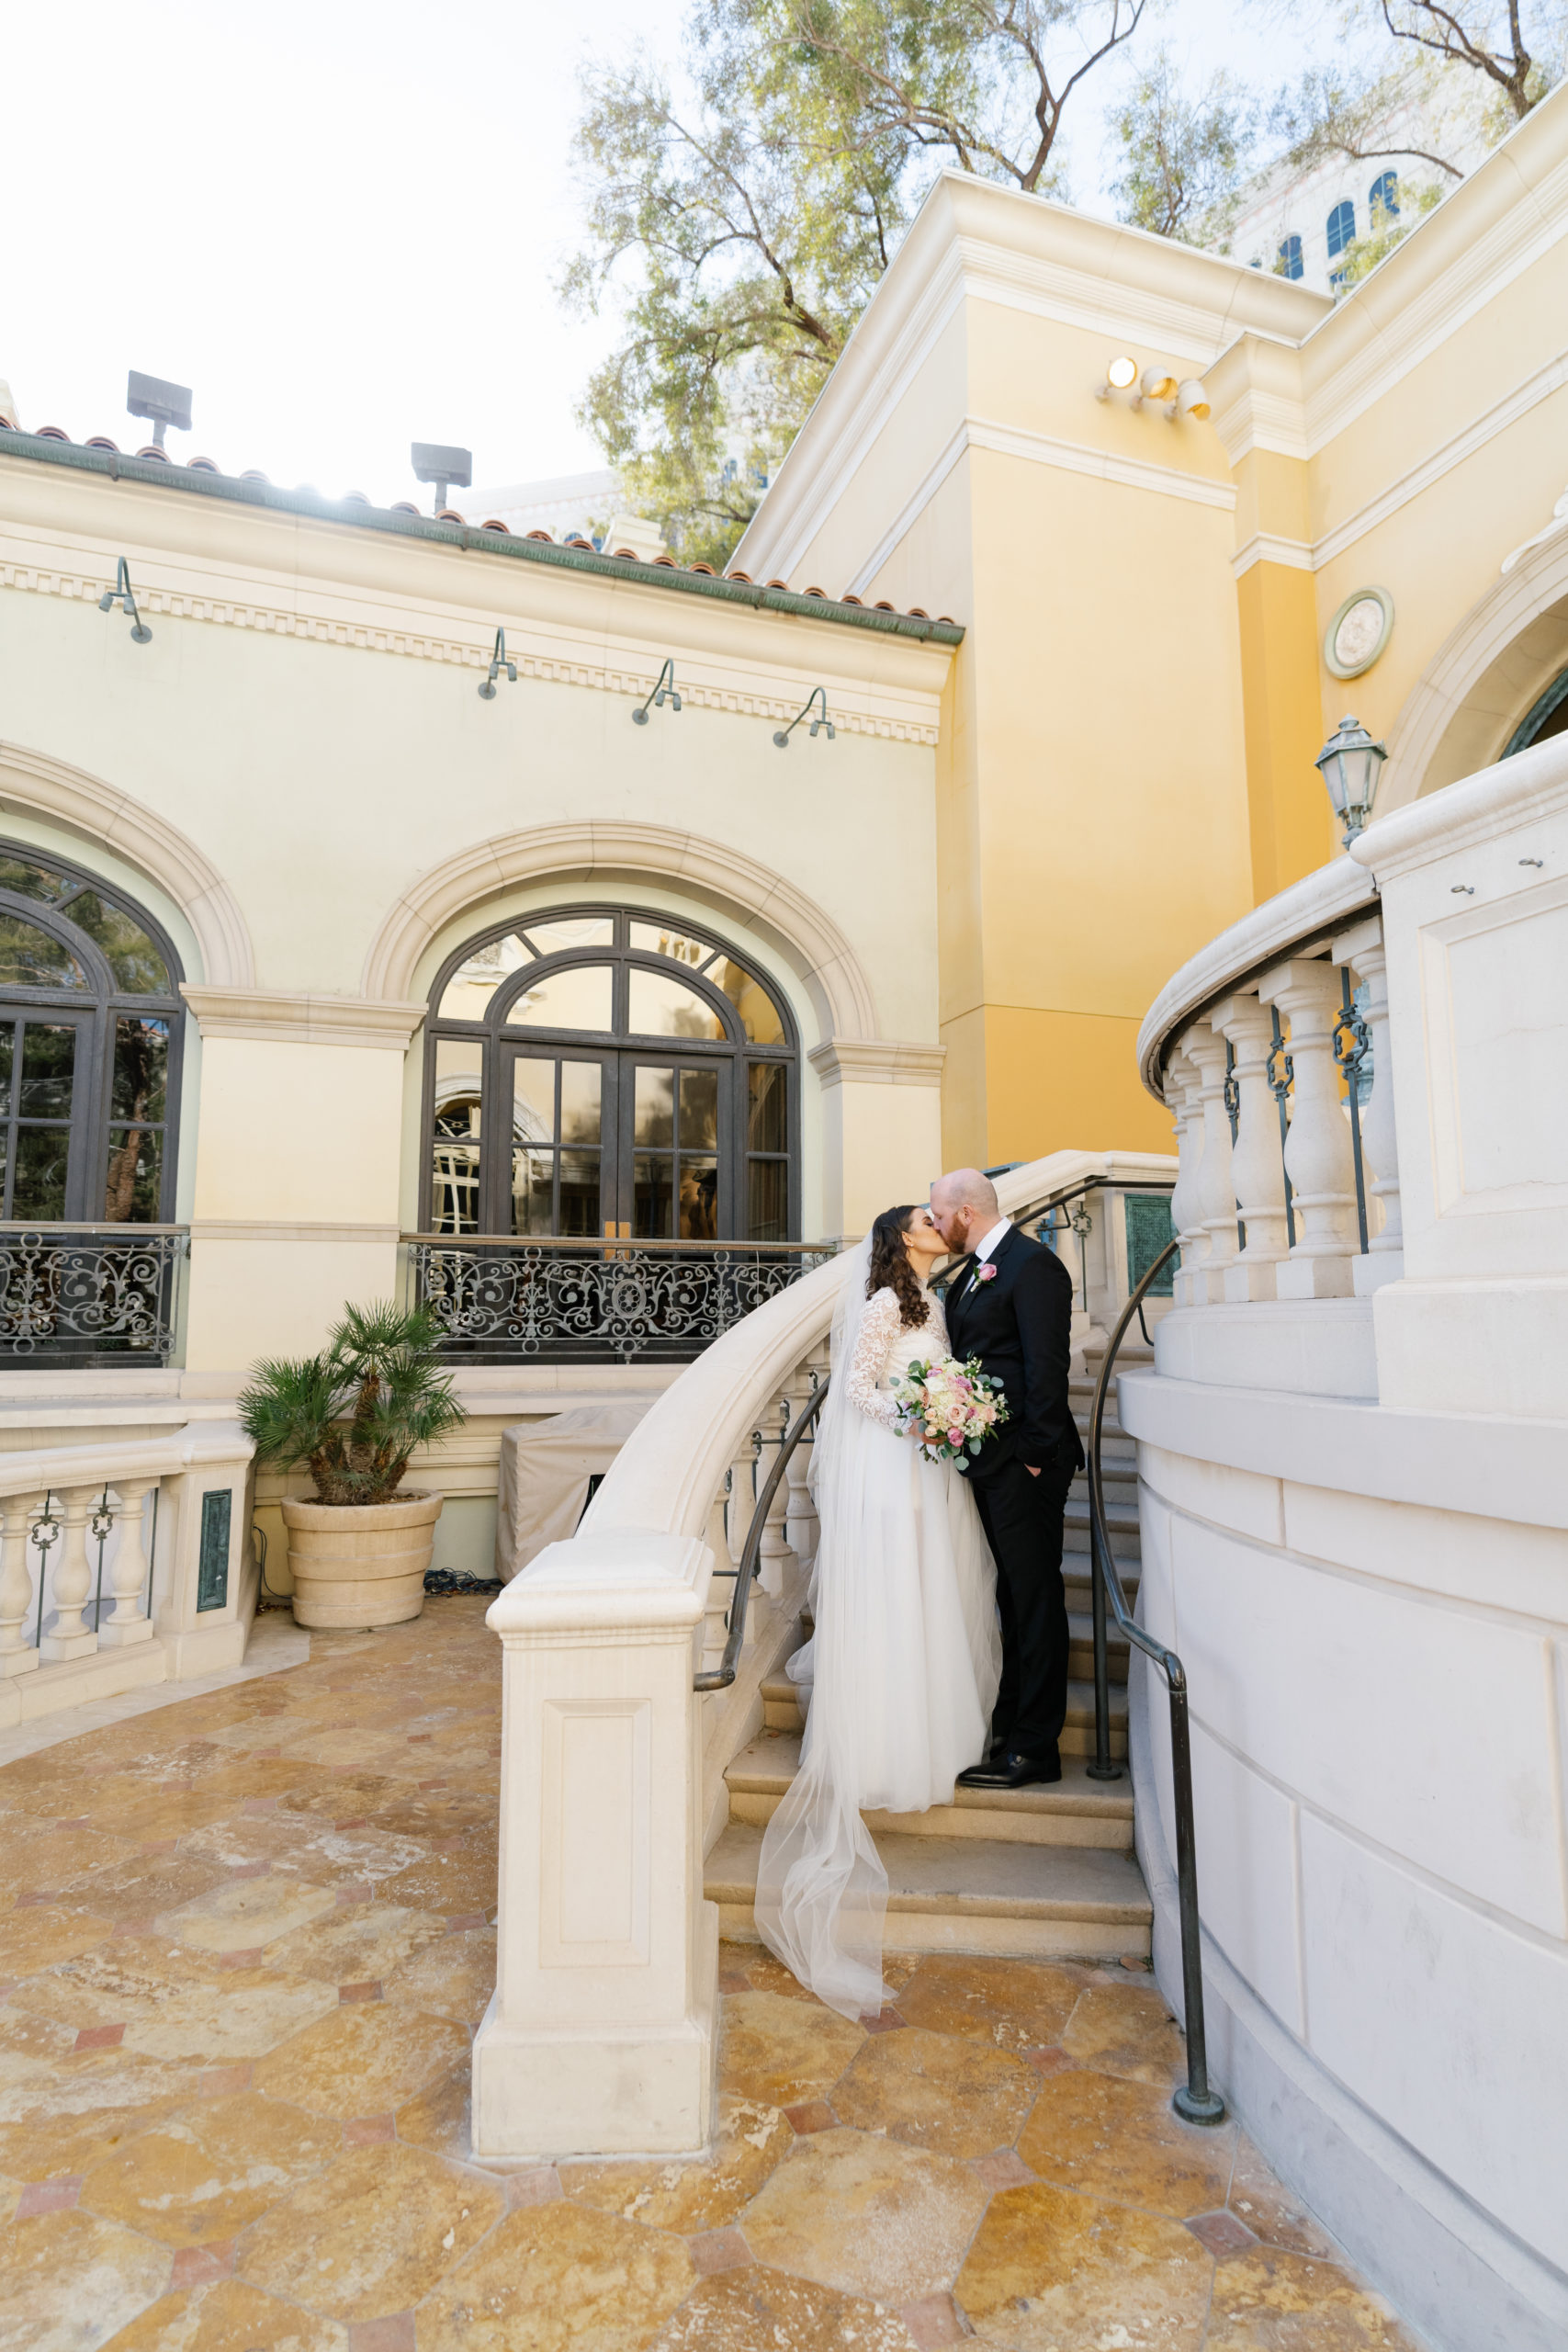 Bellagio Wedding Planning Guide: Bride and groom sharing a kiss at the staircase in their Las Vegas wedding venue